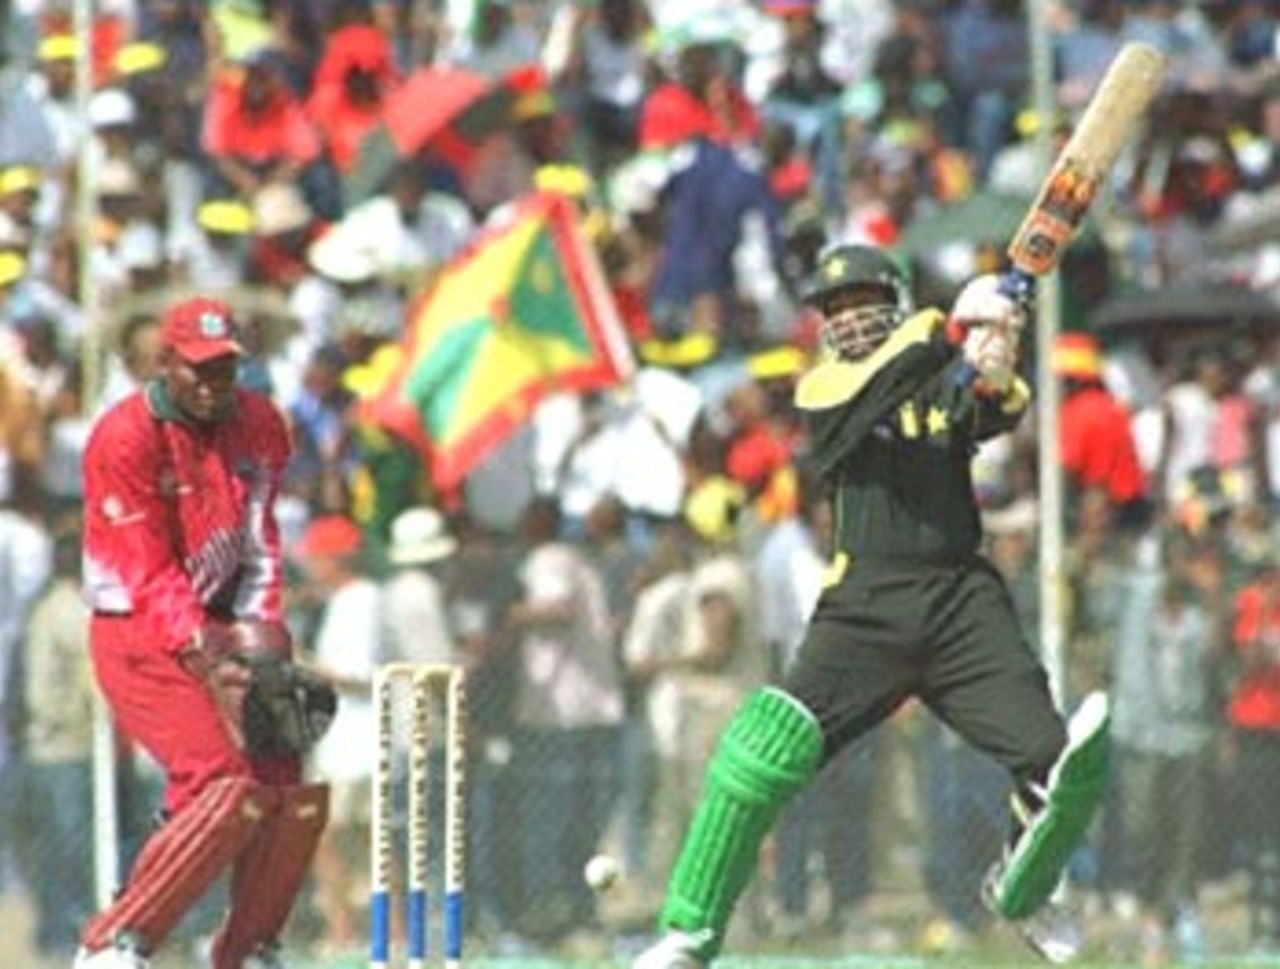 Pakistani batsman Yousuf Youhana (R) goes after the ball 16 April, 2000, during the cricket match against the West Indies at Queen's Park Stadium in St. George's, Genada. The West Indies won the match. Player at left is unidentified.